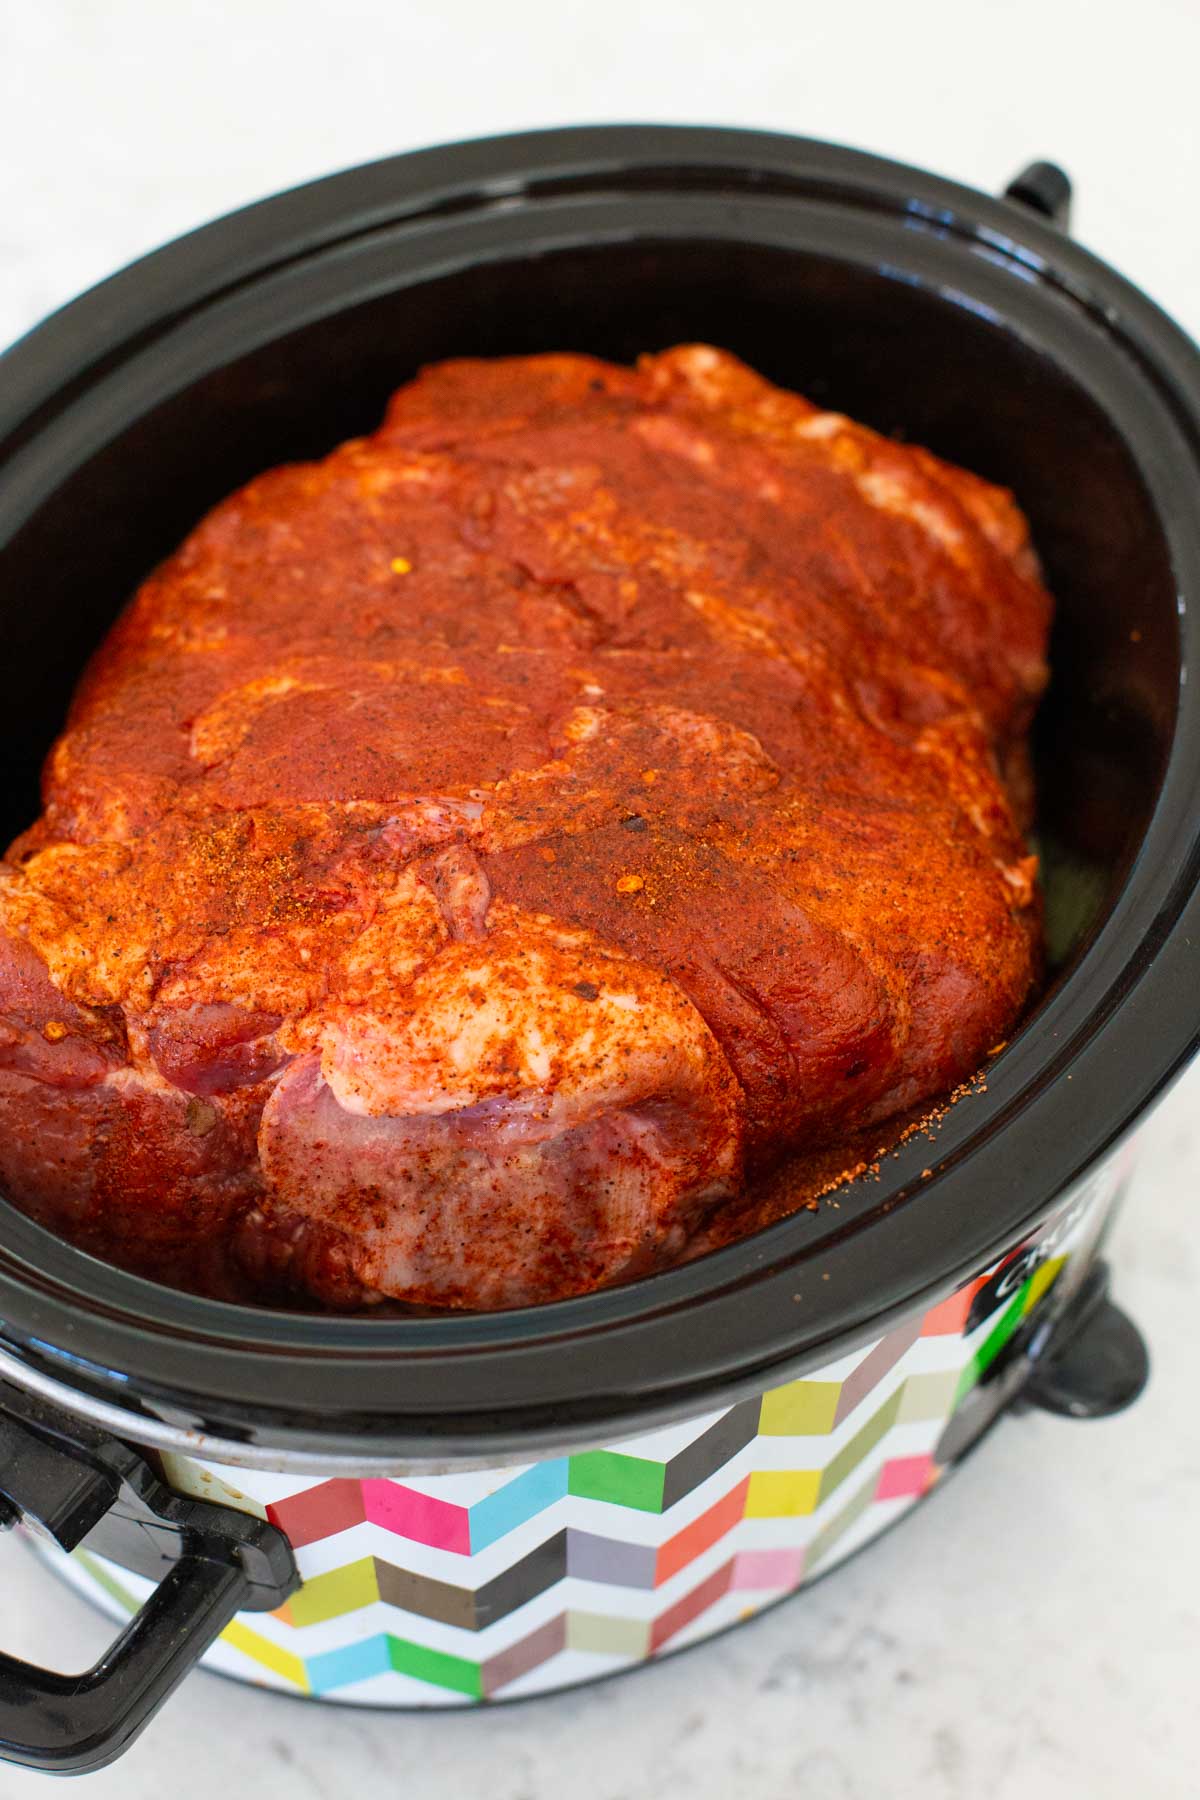 The pork roast has been placed inside the slowecooker for cooking.